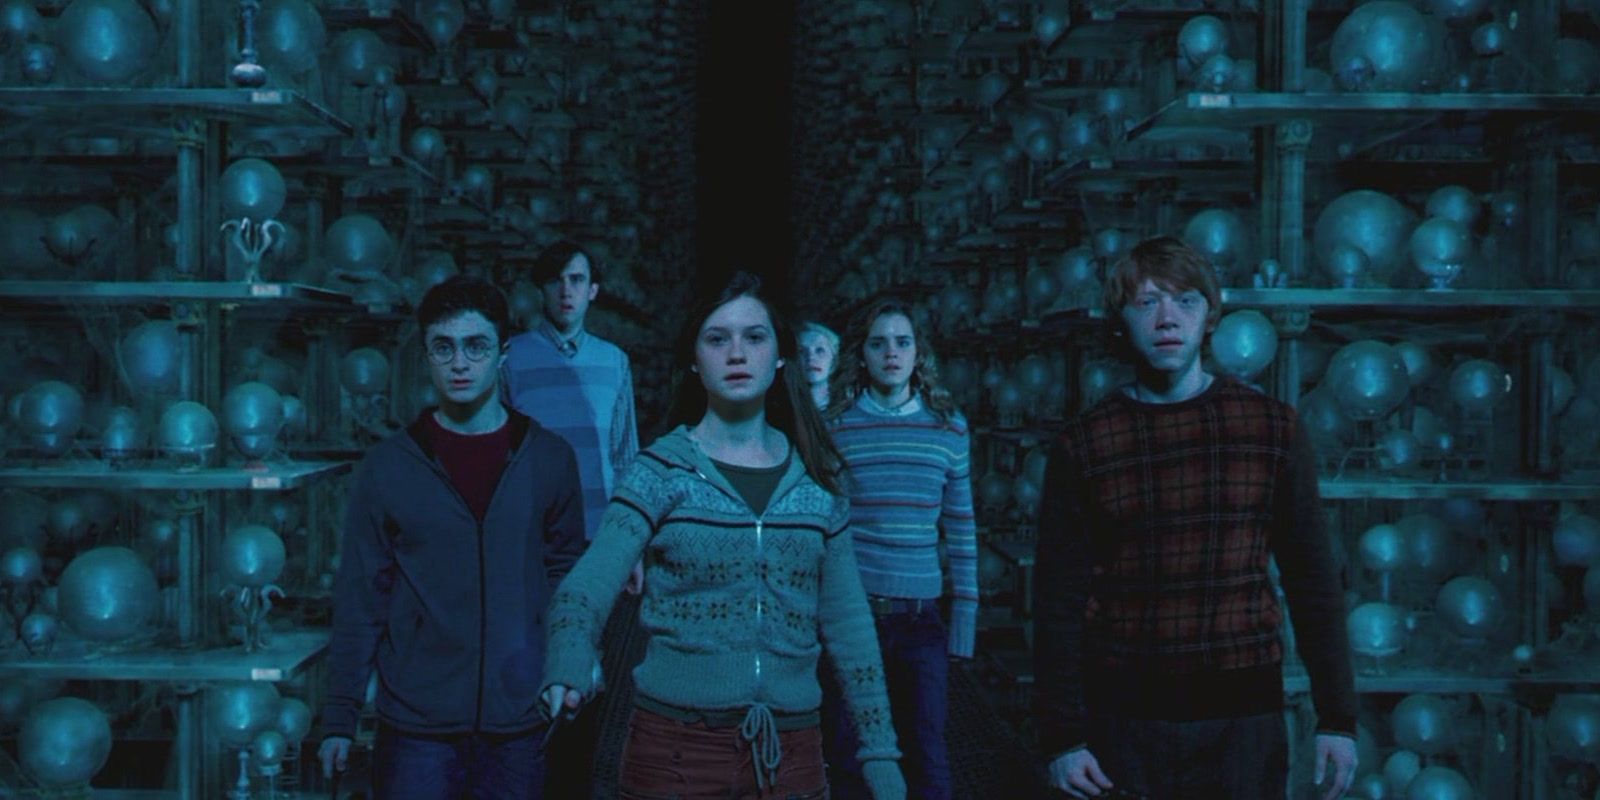 Harry, Neville, Ginny, Luna, Hermione and Ron in the Department of Mysteries